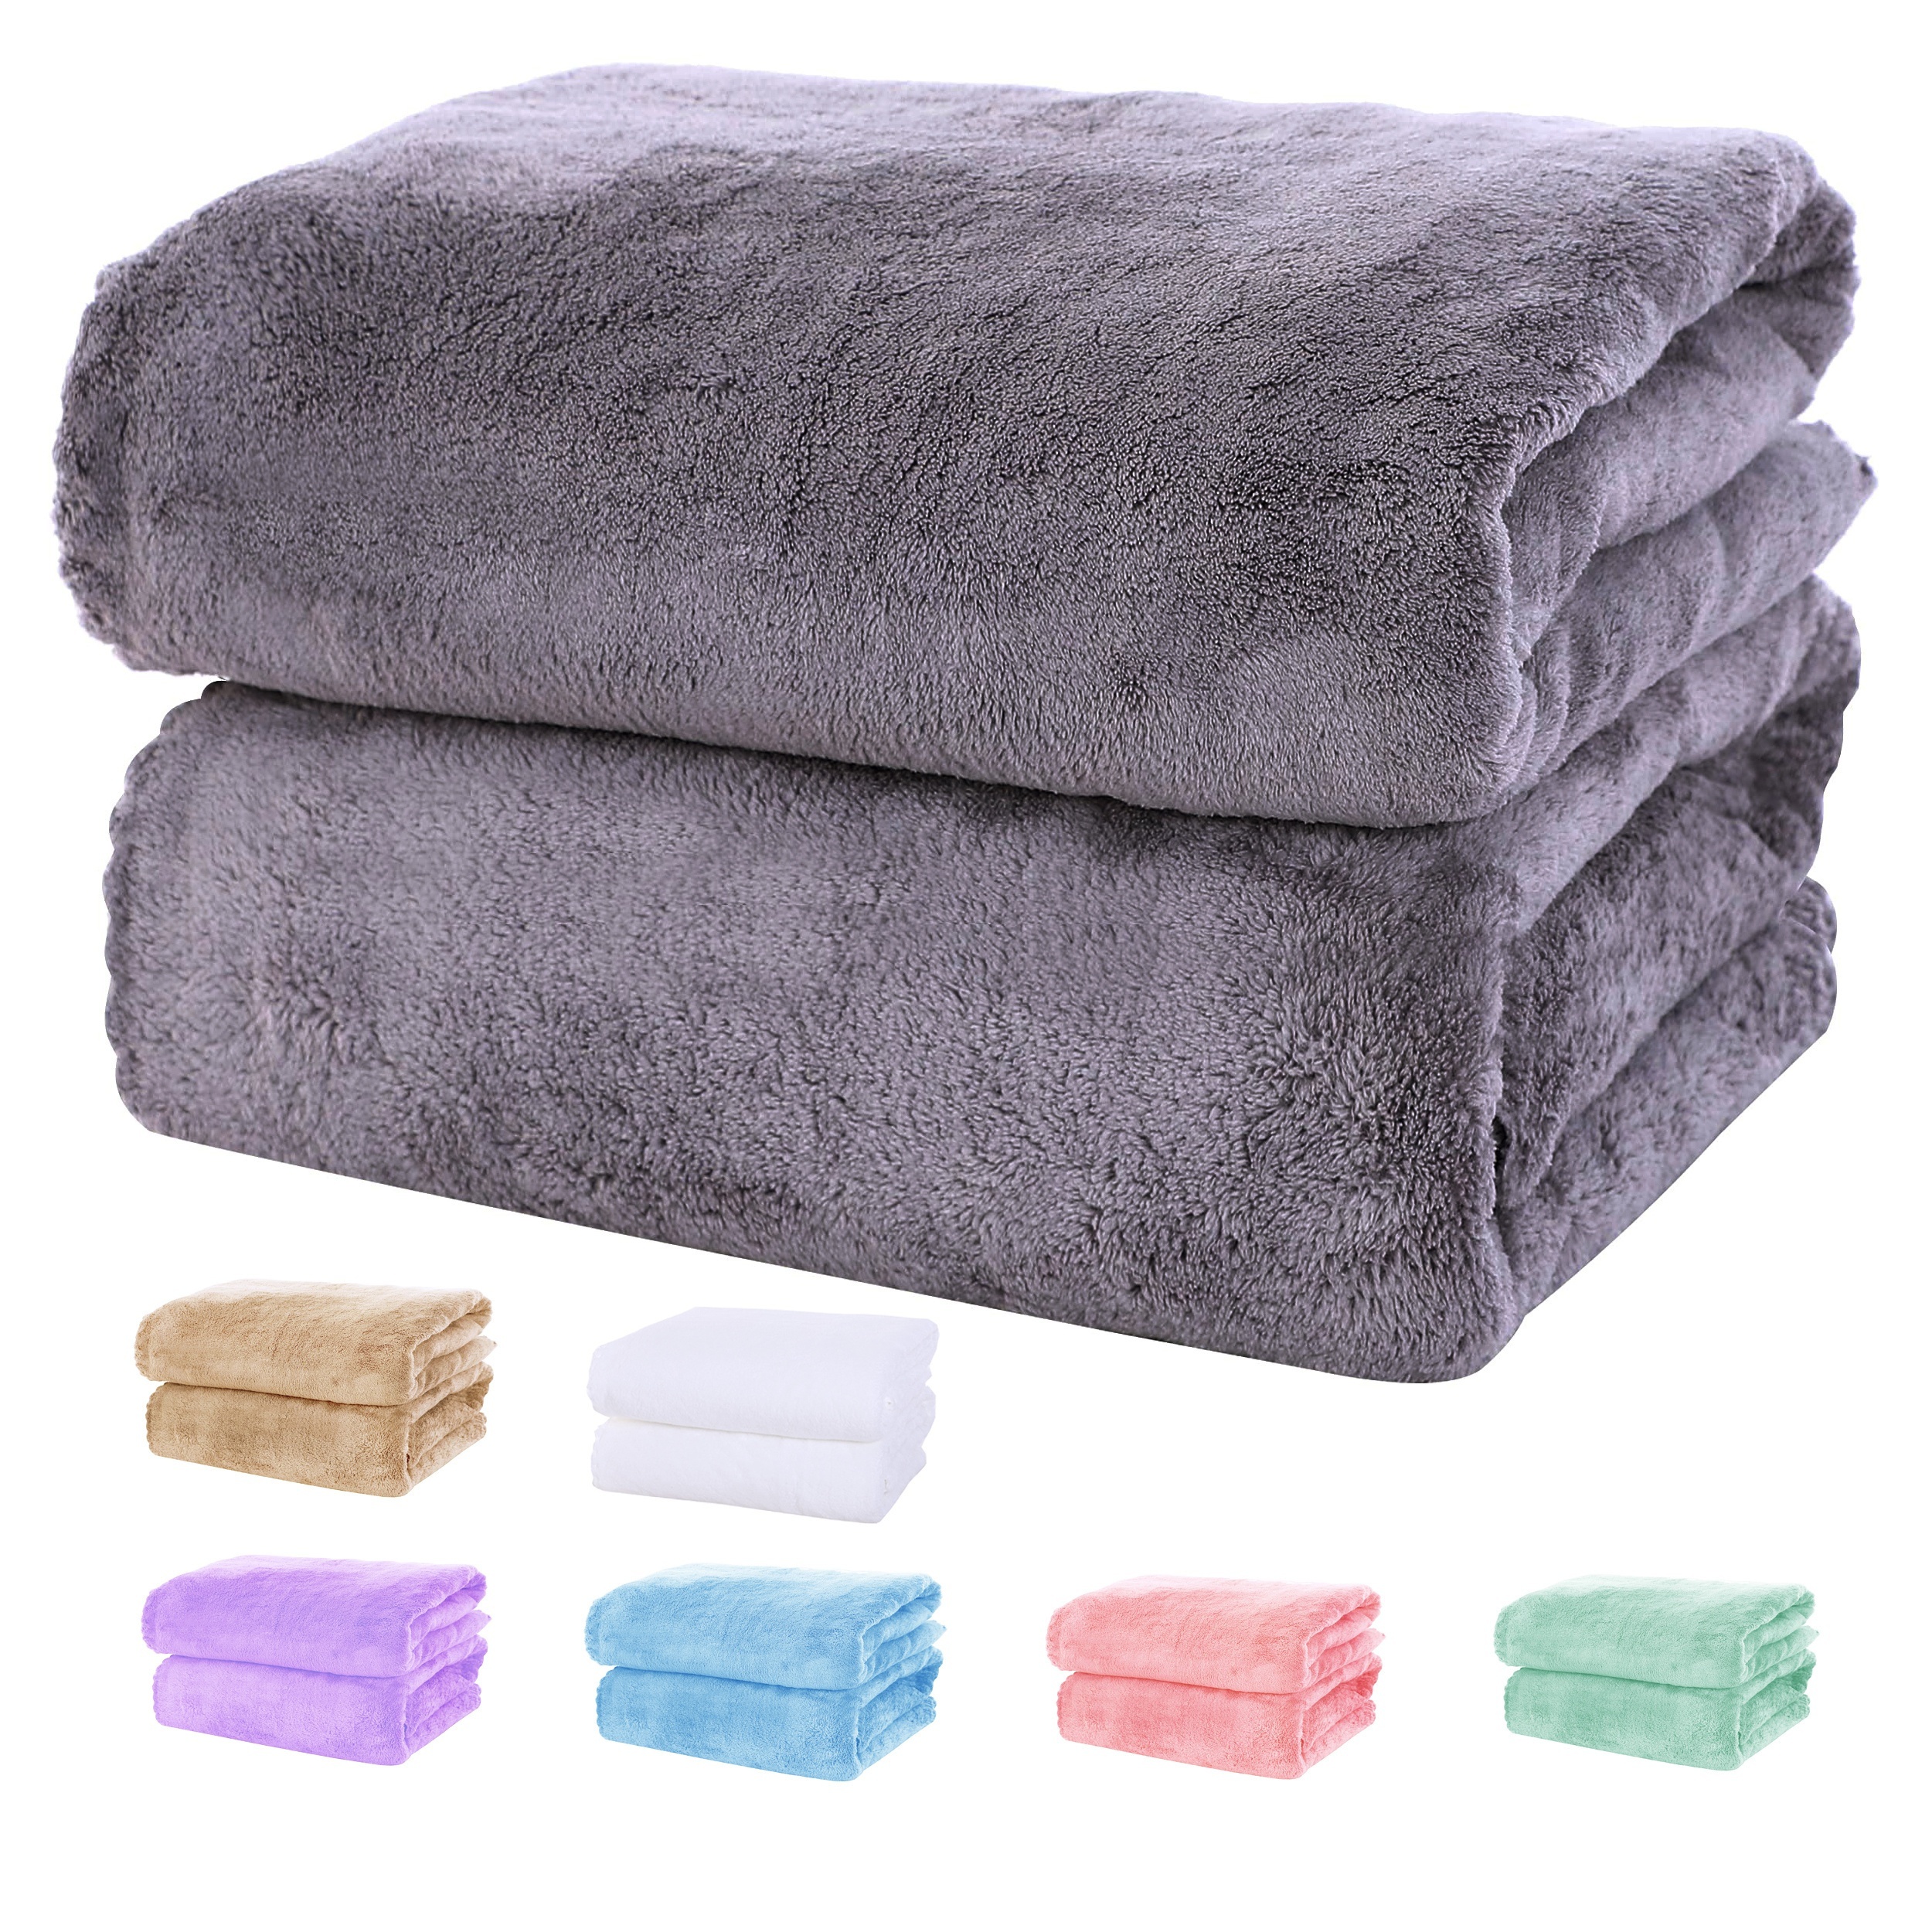 Double sided Velvet Quick Drying Towel Set Sports Beach - Temu Canada